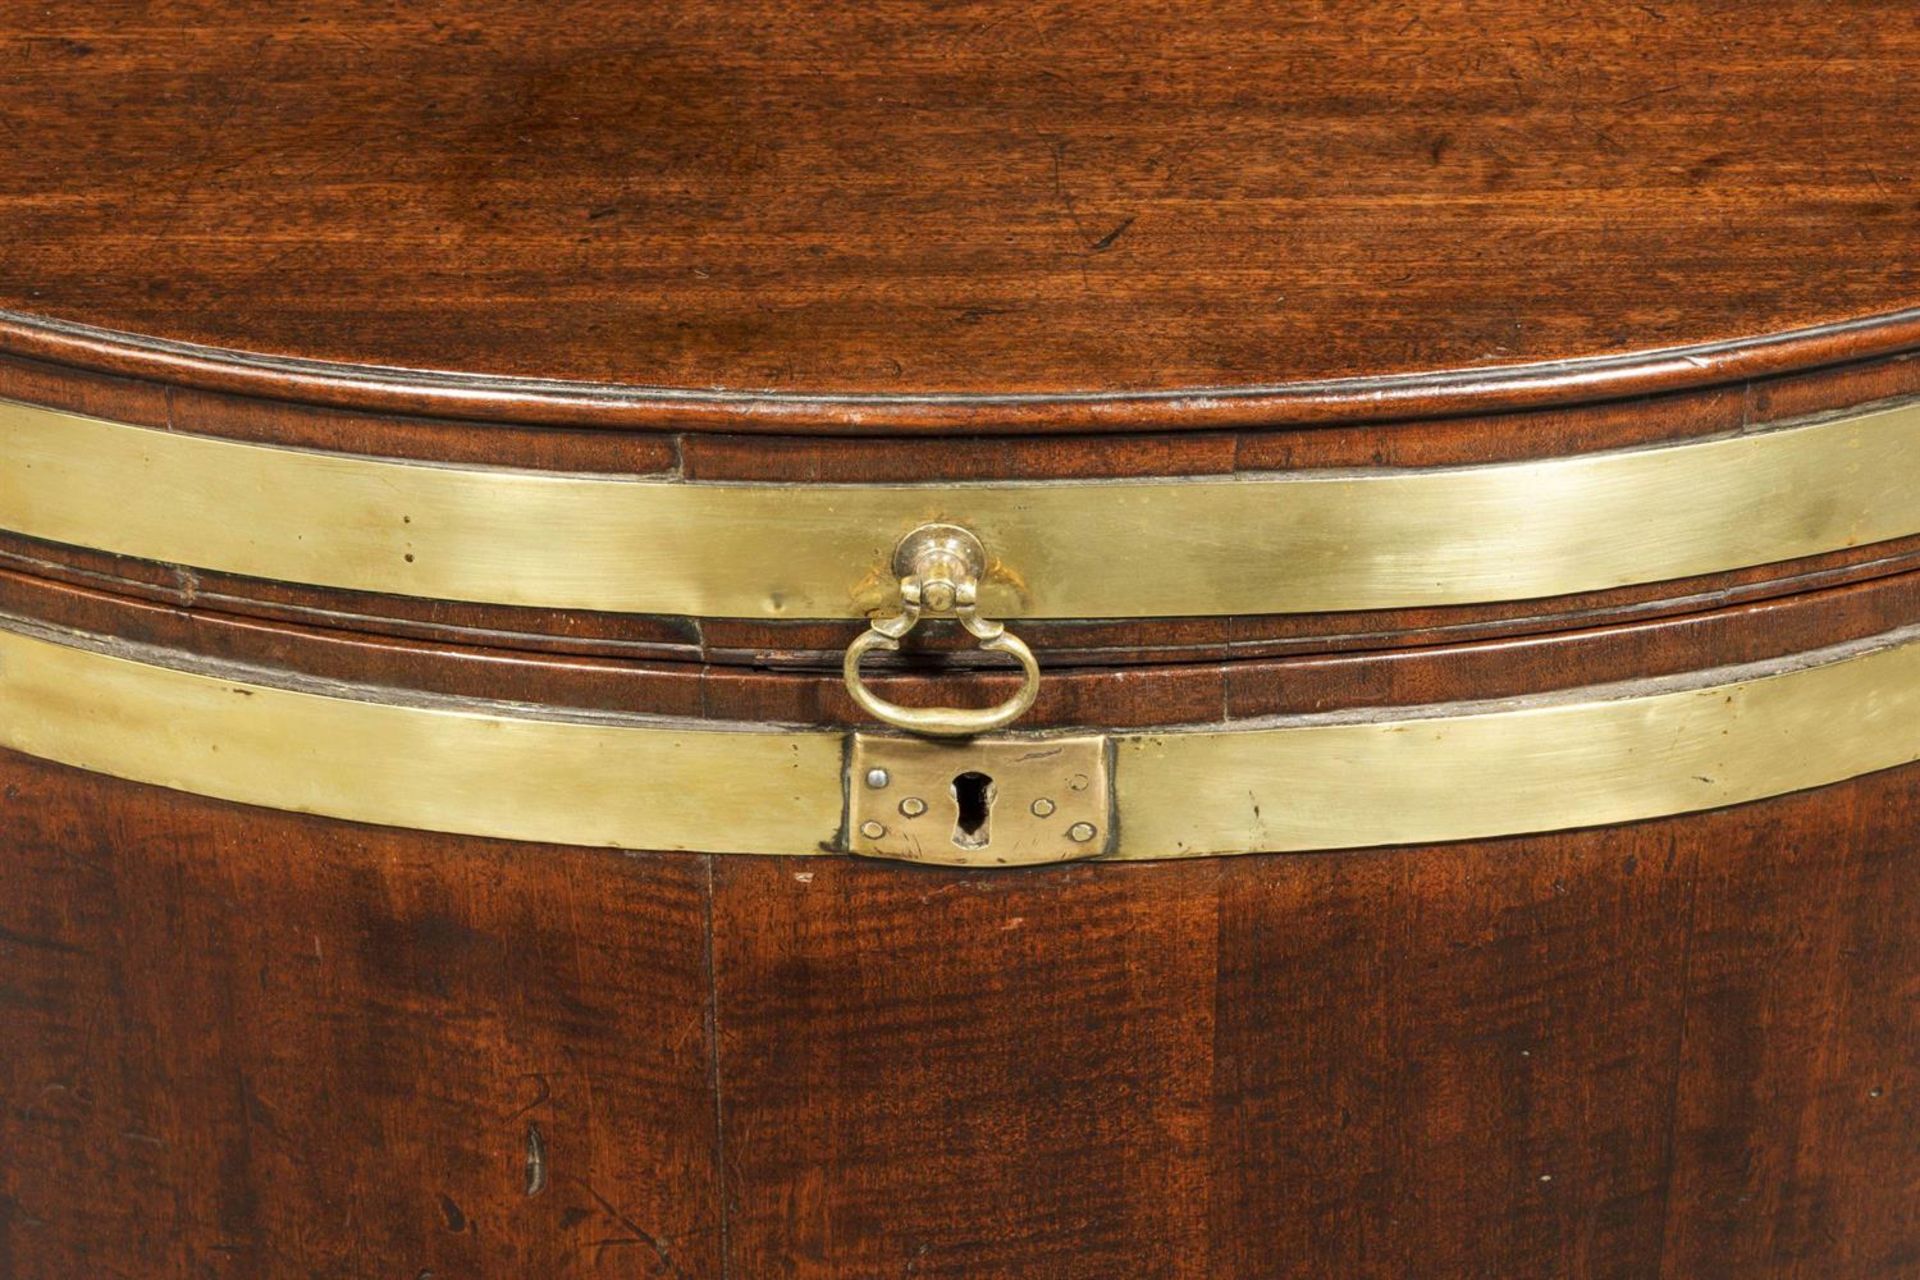 A GEORGE III MAHOGANY AND BRASS BOUND CELLARET, LATE 18TH CENTURY - Image 3 of 5